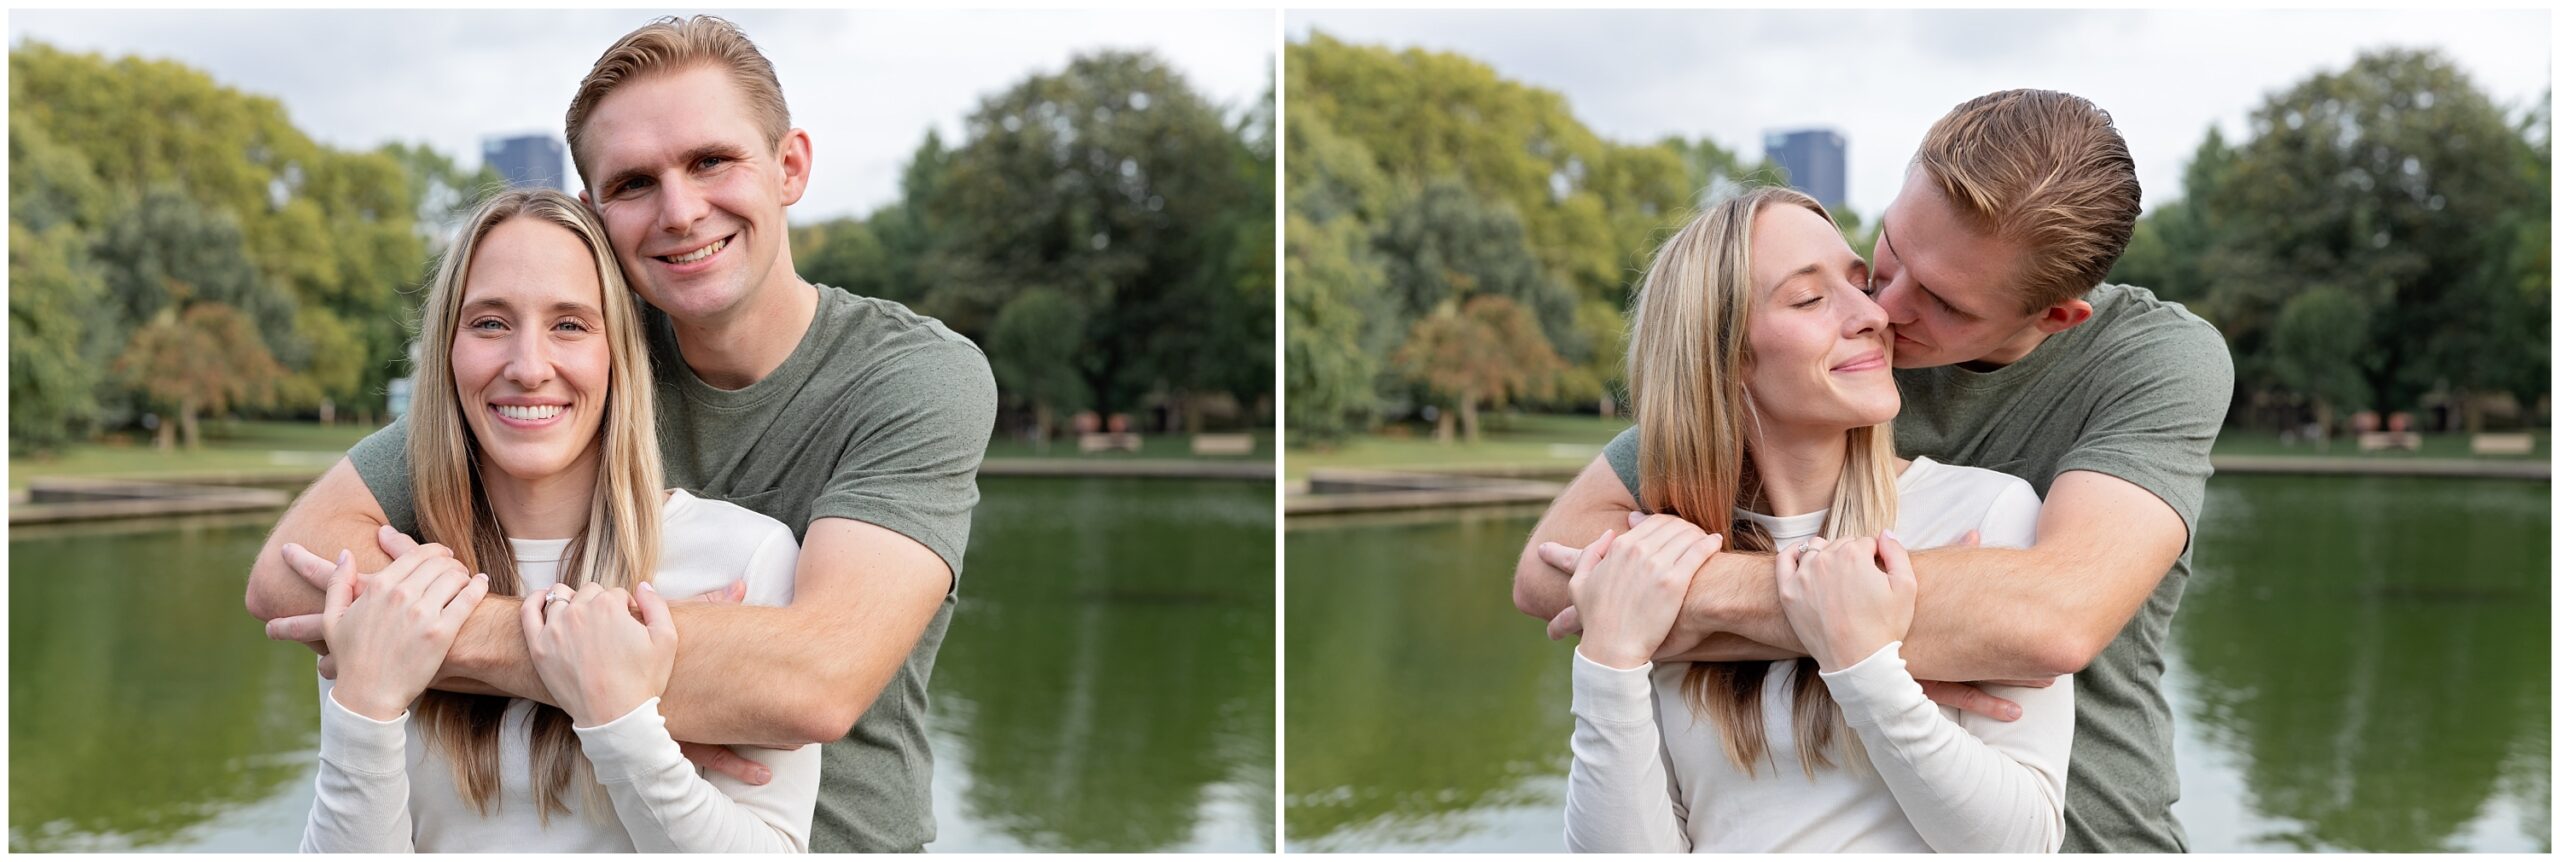 Allegheny Commons Park, Lake Elizabeth Engagement Session in Pittsburgh PA photographed by Pittsburgh Wedding Photographer Catherine Acevedo Photography